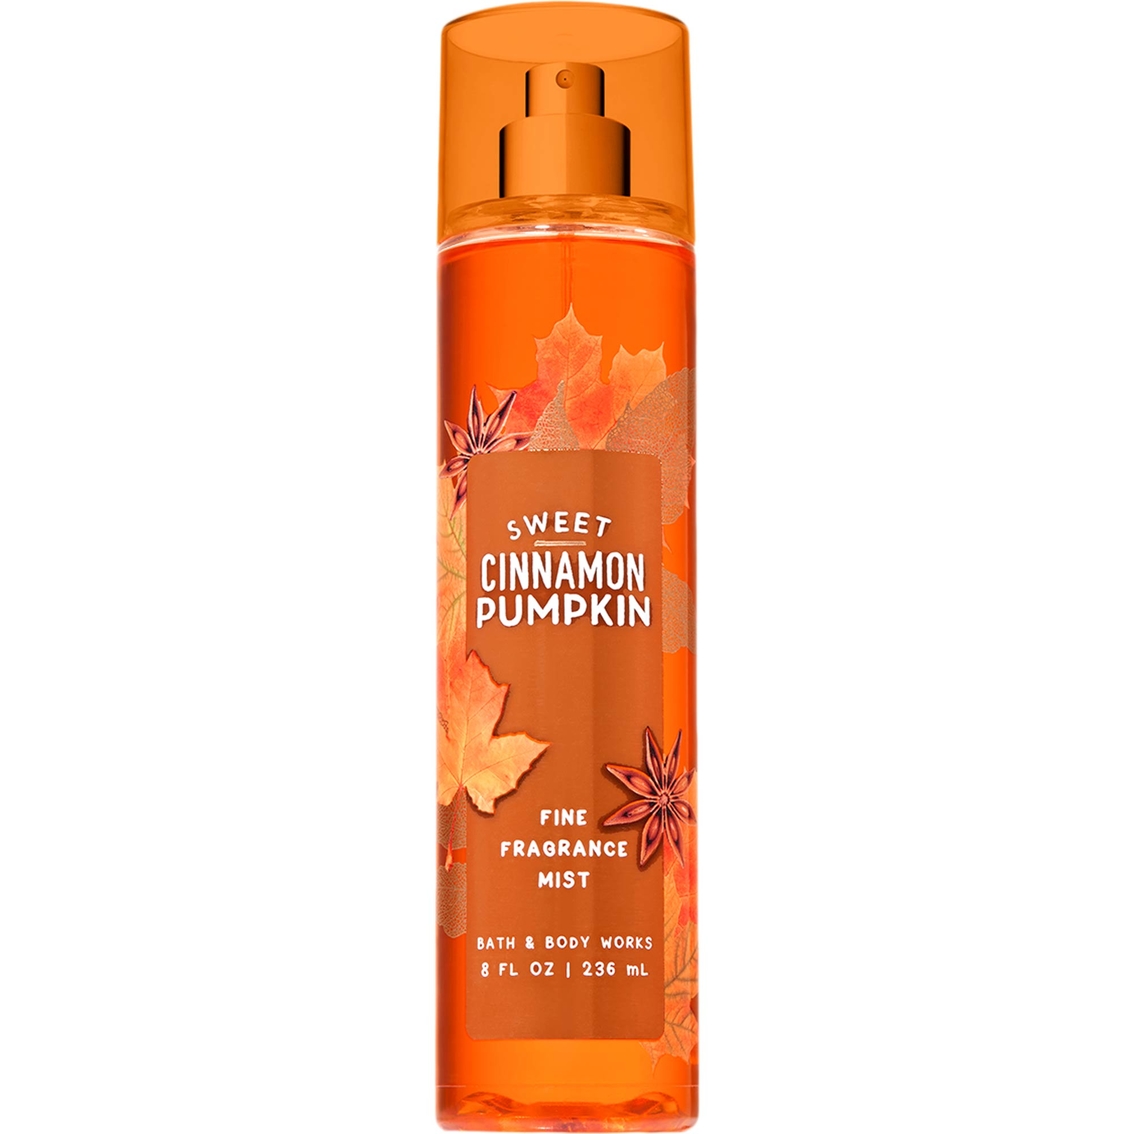 Purrfect Pumpkin Bath and Body Works perfume a new fragrance for